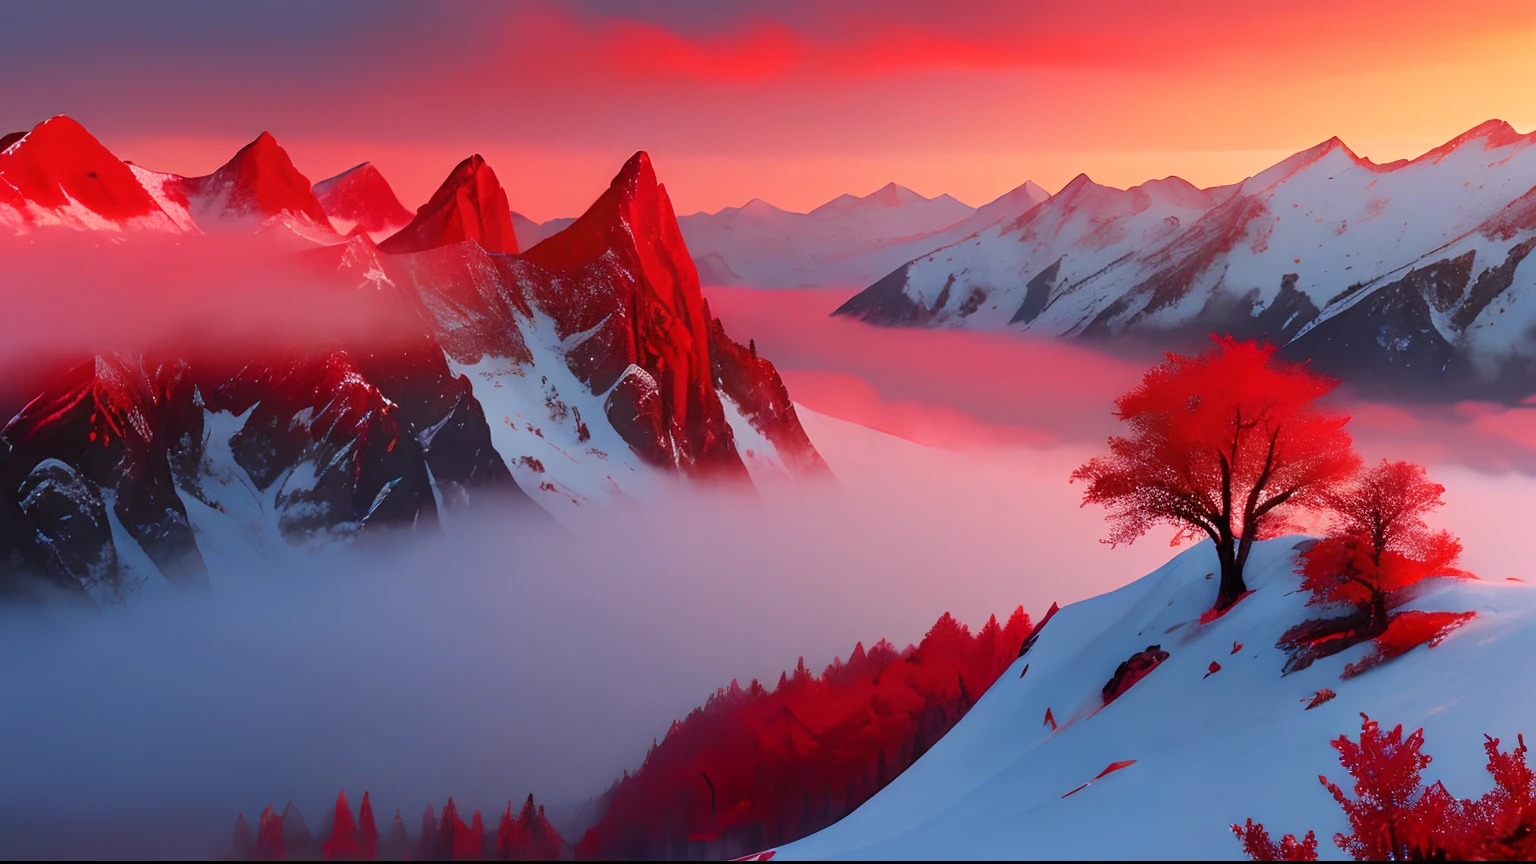 ((masterpiece:1.4,best quality)), cloud,  outdoors
(mountains), spring glade, scenery, sky, winter, steep climb, many people, villagers, walk, strong wind
(early morning:1.4),morning red, high detail, abundant, 8k, high detail, wallpaper, fantasy landscape